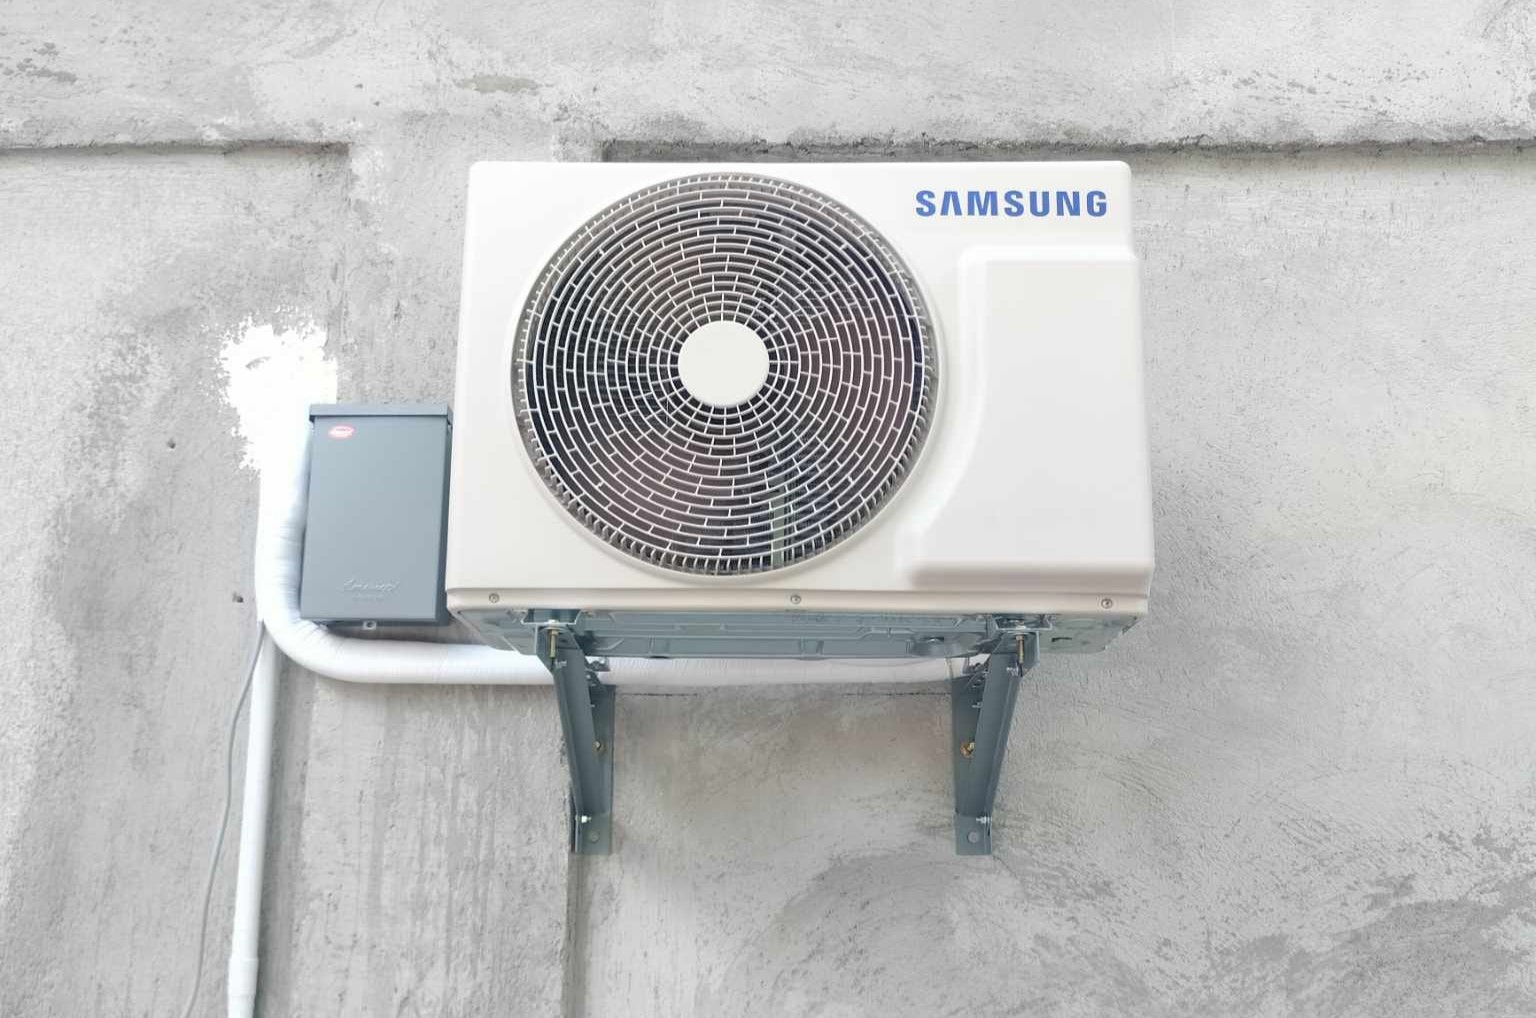 How To Fix The Error Code E426 For Samsung Air Conditioner